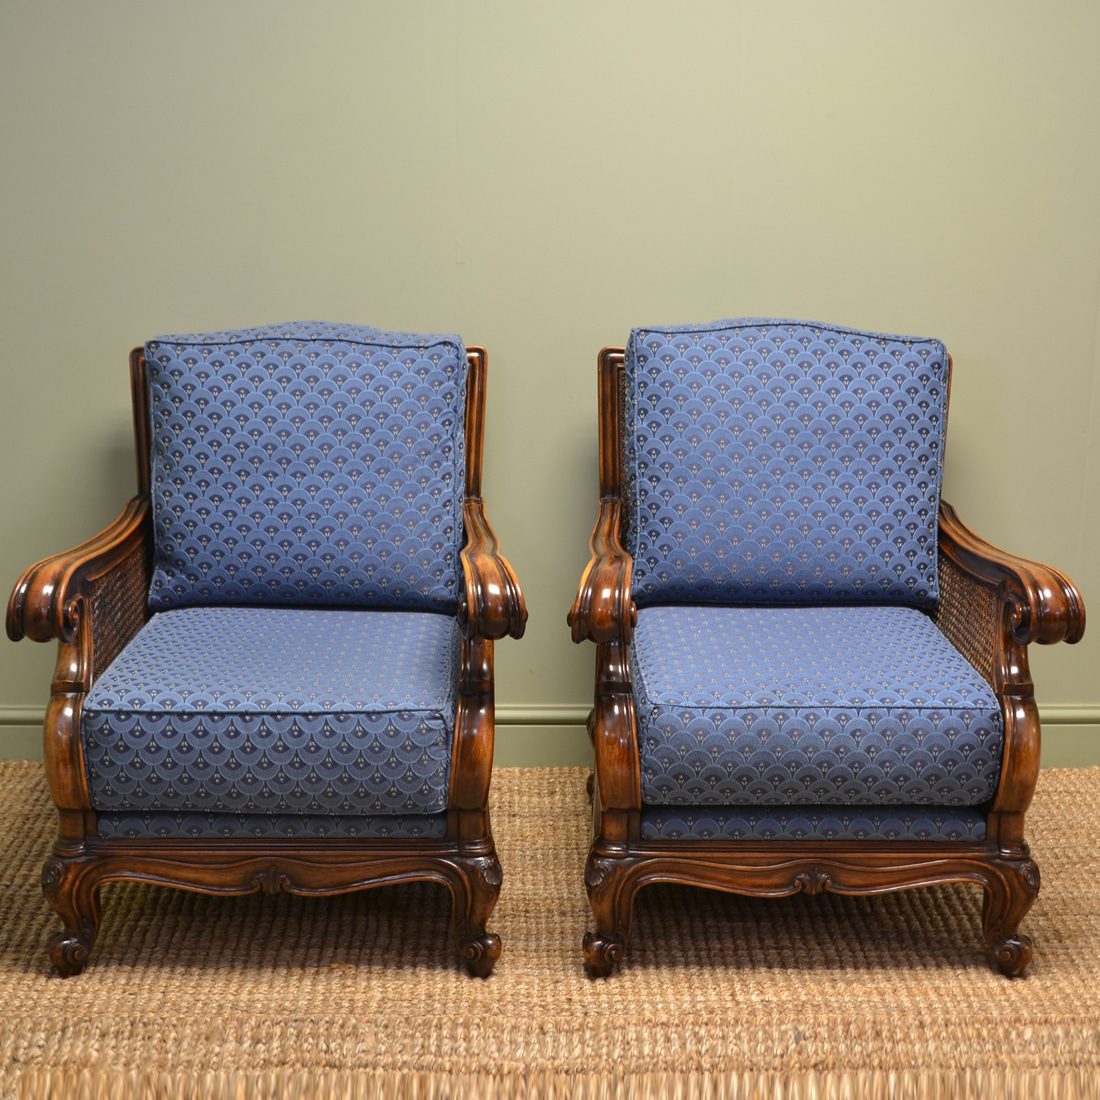 Pair of Matching Edwardian Walnut Antique Bergere Arm Chairs